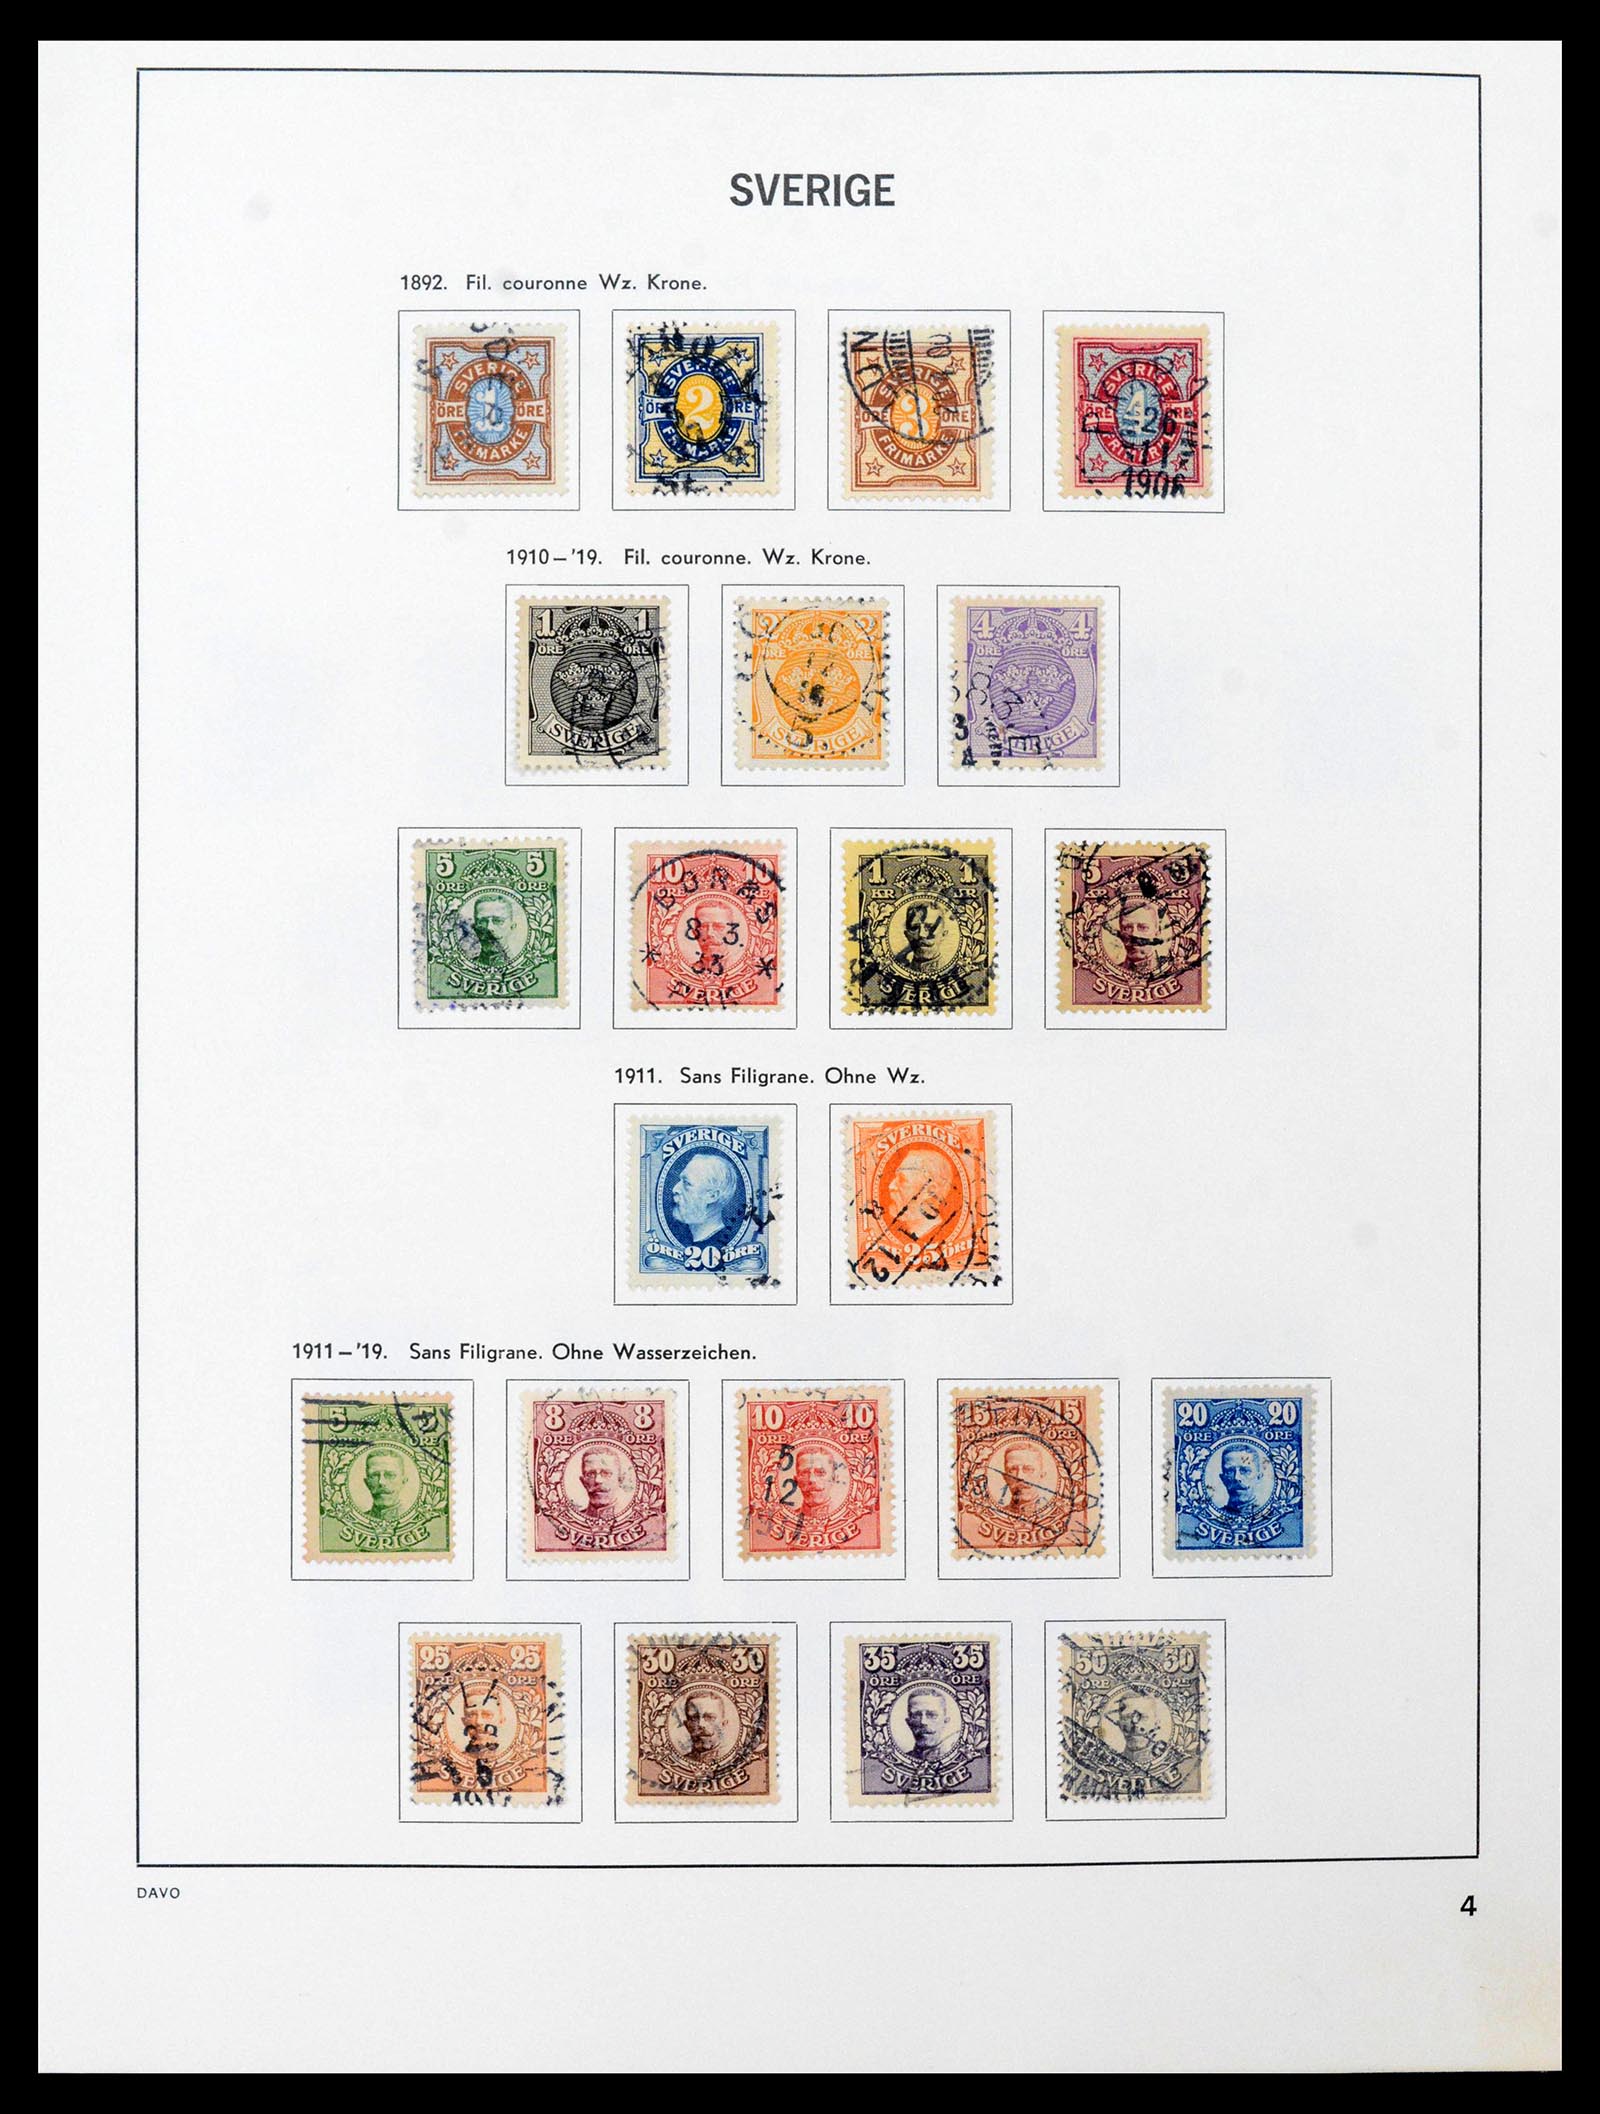 39331 0004 - Stamp collection 39331 Sweden 1855-2005.